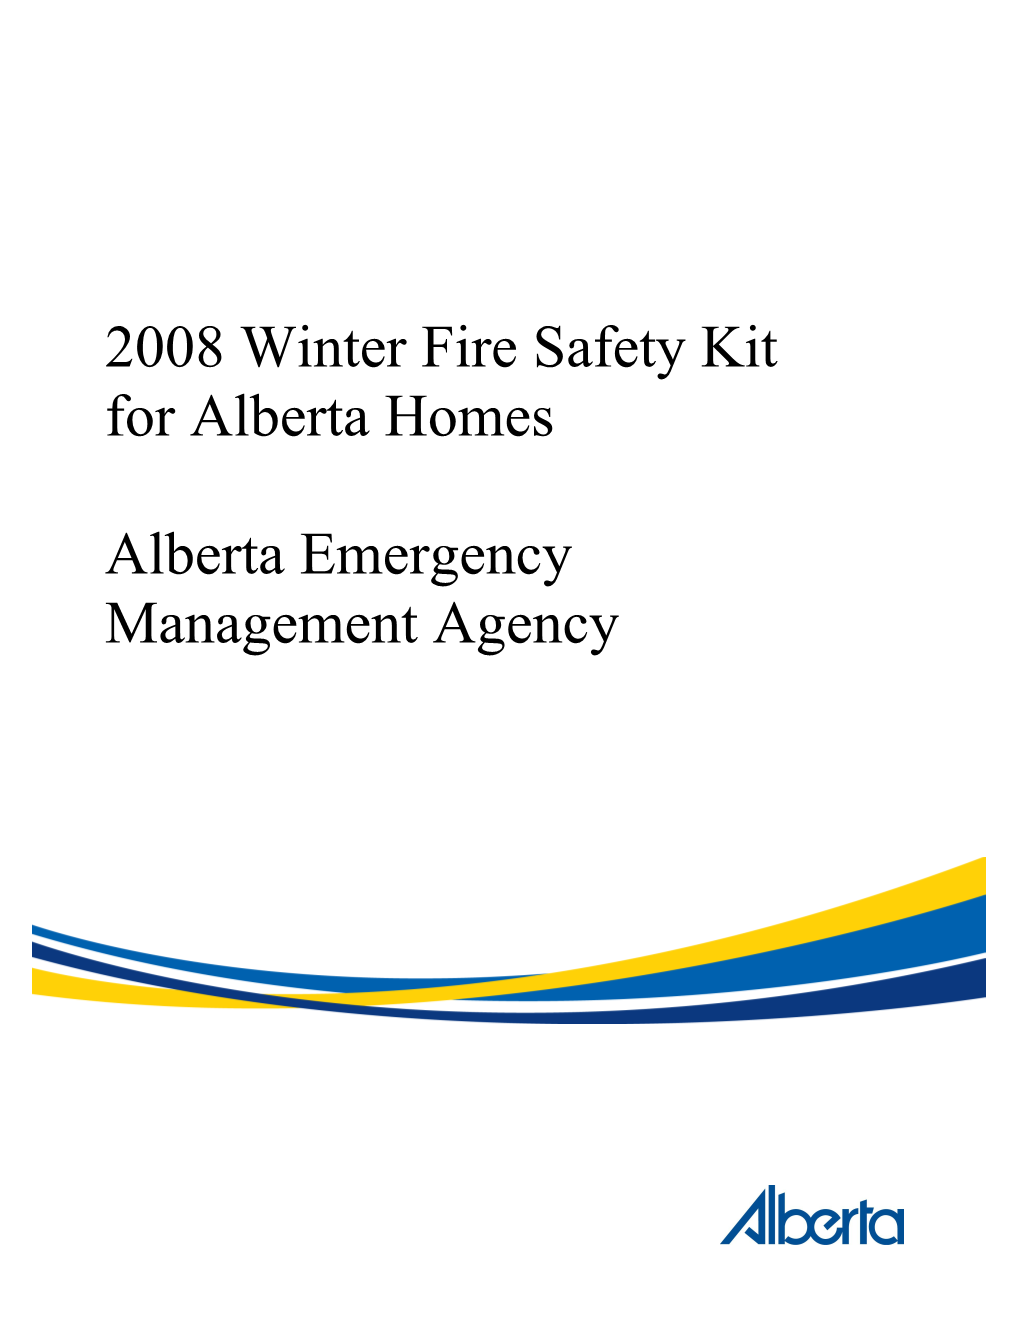 Message from the Managing Director, Alberta Emergency Management Agency 3